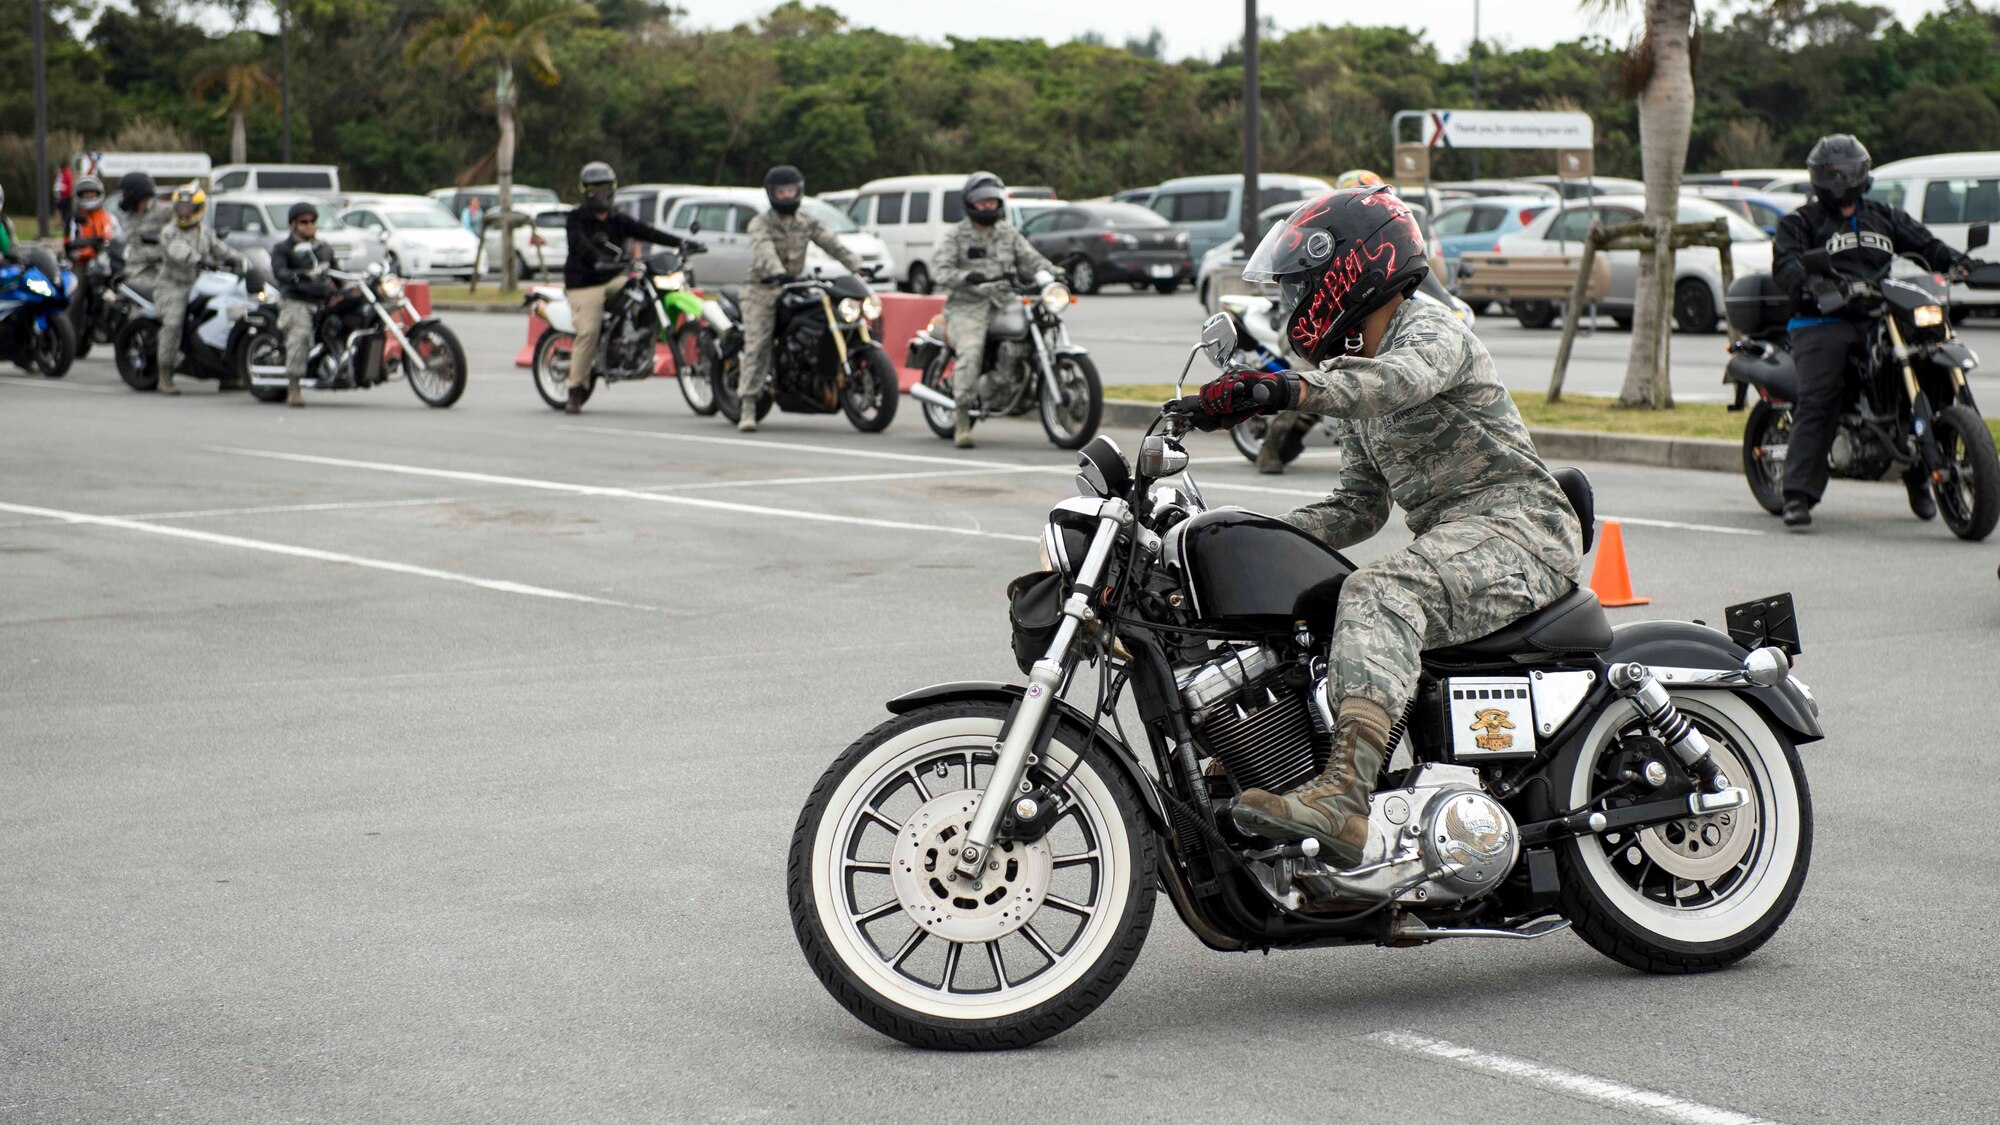 Motorcycle riders refresh their skills on a handling course during an 18th Wing annual motorcycle safety brief March 9, 2017, at Kadena Air Base, Japan. The Green Knights chapter 138 set up a skills test course to help riders improve their bike handling capabilities and to reinforce safety standards. (U.S. Air Force photo by Staff Sgt. Peter Reft/Released)